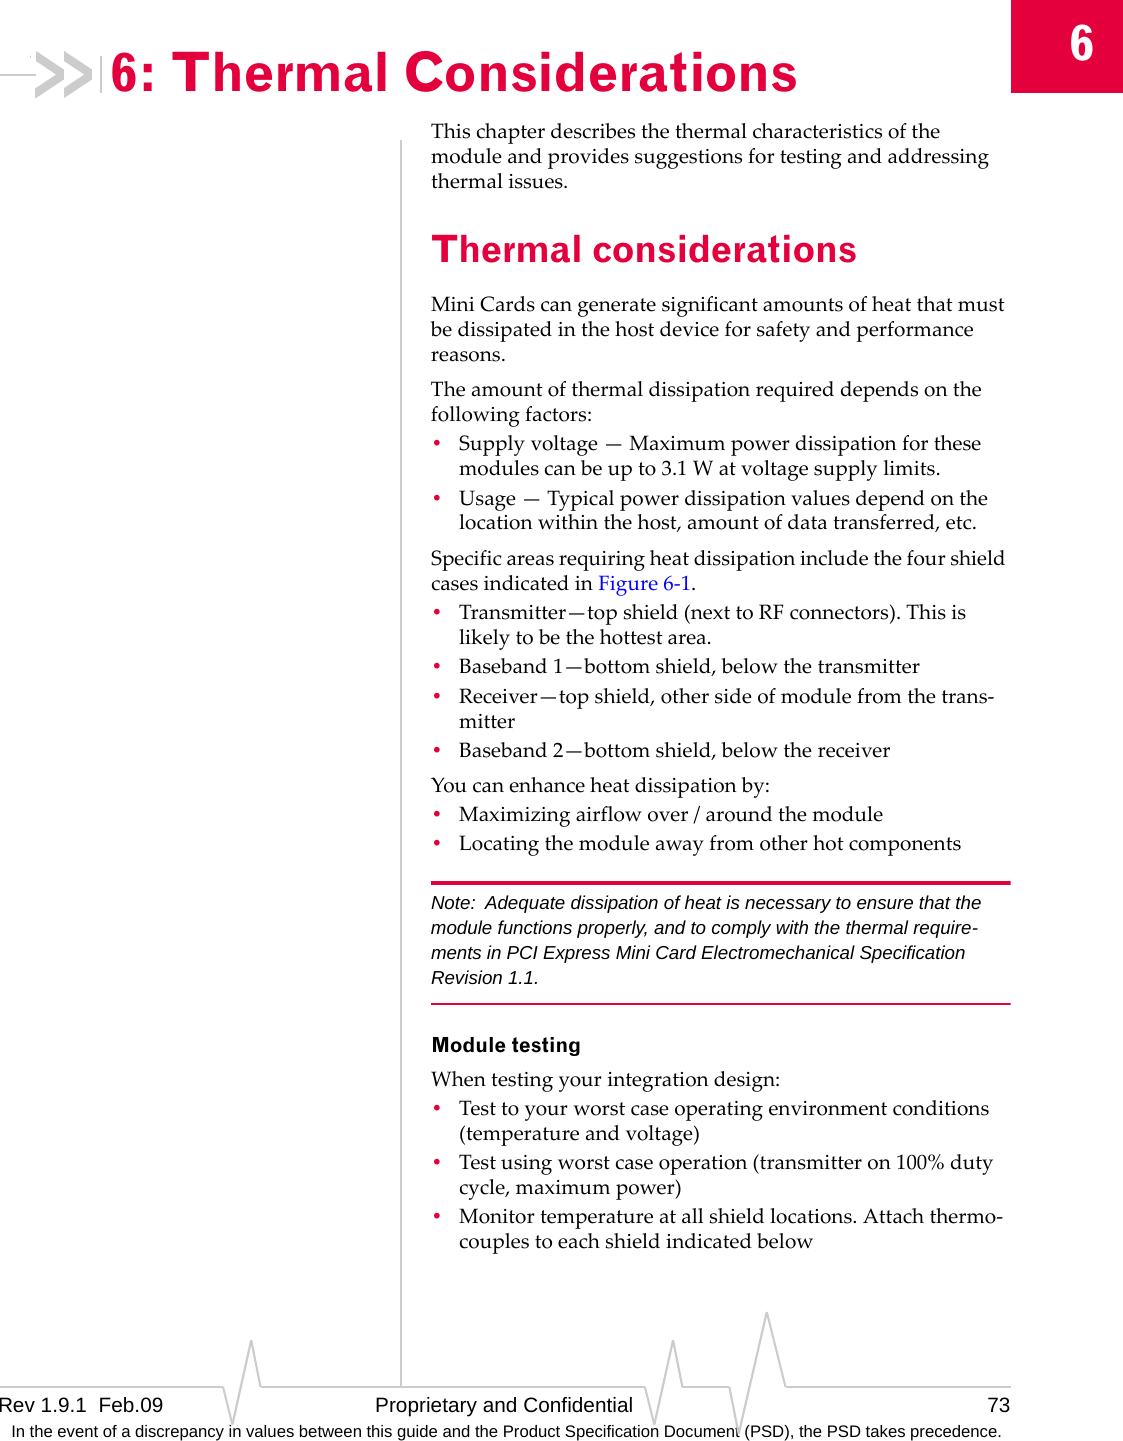 6Rev 1.9.1  Feb.09 Proprietary and Confidential 73 In the event of a discrepancy in values between this guide and the Product Specification Document (PSD), the PSD takes precedence.6: Thermal ConsiderationsThischapterdescribesthethermalcharacteristicsofthemoduleandprovidessuggestionsfortestingandaddressingthermalissues.Thermal considerationsMiniCardscangeneratesignificantamountsofheatthatmustbedissipatedinthehostdeviceforsafetyandperformancereasons.Theamountofthermaldissipationrequireddependsonthefollowingfactors:•Supplyvoltage—Maximumpowerdissipationforthesemodulescanbeupto3.1Watvoltagesupplylimits.•Usage—Typicalpowerdissipationvaluesdependonthelocationwithinthehost,amountofdatatransferred,etc.SpecificareasrequiringheatdissipationincludethefourshieldcasesindicatedinFigure6‐1.•Transmitter—topshield(nexttoRFconnectors).Thisislikelytobethehottestarea.•Baseband1—bottomshield,belowthetransmitter•Receiver—topshield,othersideofmodulefromthetrans‐mitter•Baseband2—bottomshield,belowthereceiverYoucanenhanceheatdissipationby:•Maximizingairflowover/aroundthemodule•LocatingthemoduleawayfromotherhotcomponentsNote: Adequate dissipation of heat is necessary to ensure that the module functions properly, and to comply with the thermal require-ments in PCI Express Mini Card Electromechanical Specification Revision 1.1.Module testingWhentestingyourintegrationdesign:•Testtoyourworstcaseoperatingenvironmentconditions(temperatureandvoltage)•Testusingworstcaseoperation(transmitteron100%dutycycle,maximumpower)•Monitortemperatureatallshieldlocations.Attachthermo‐couplestoeachshieldindicatedbelow